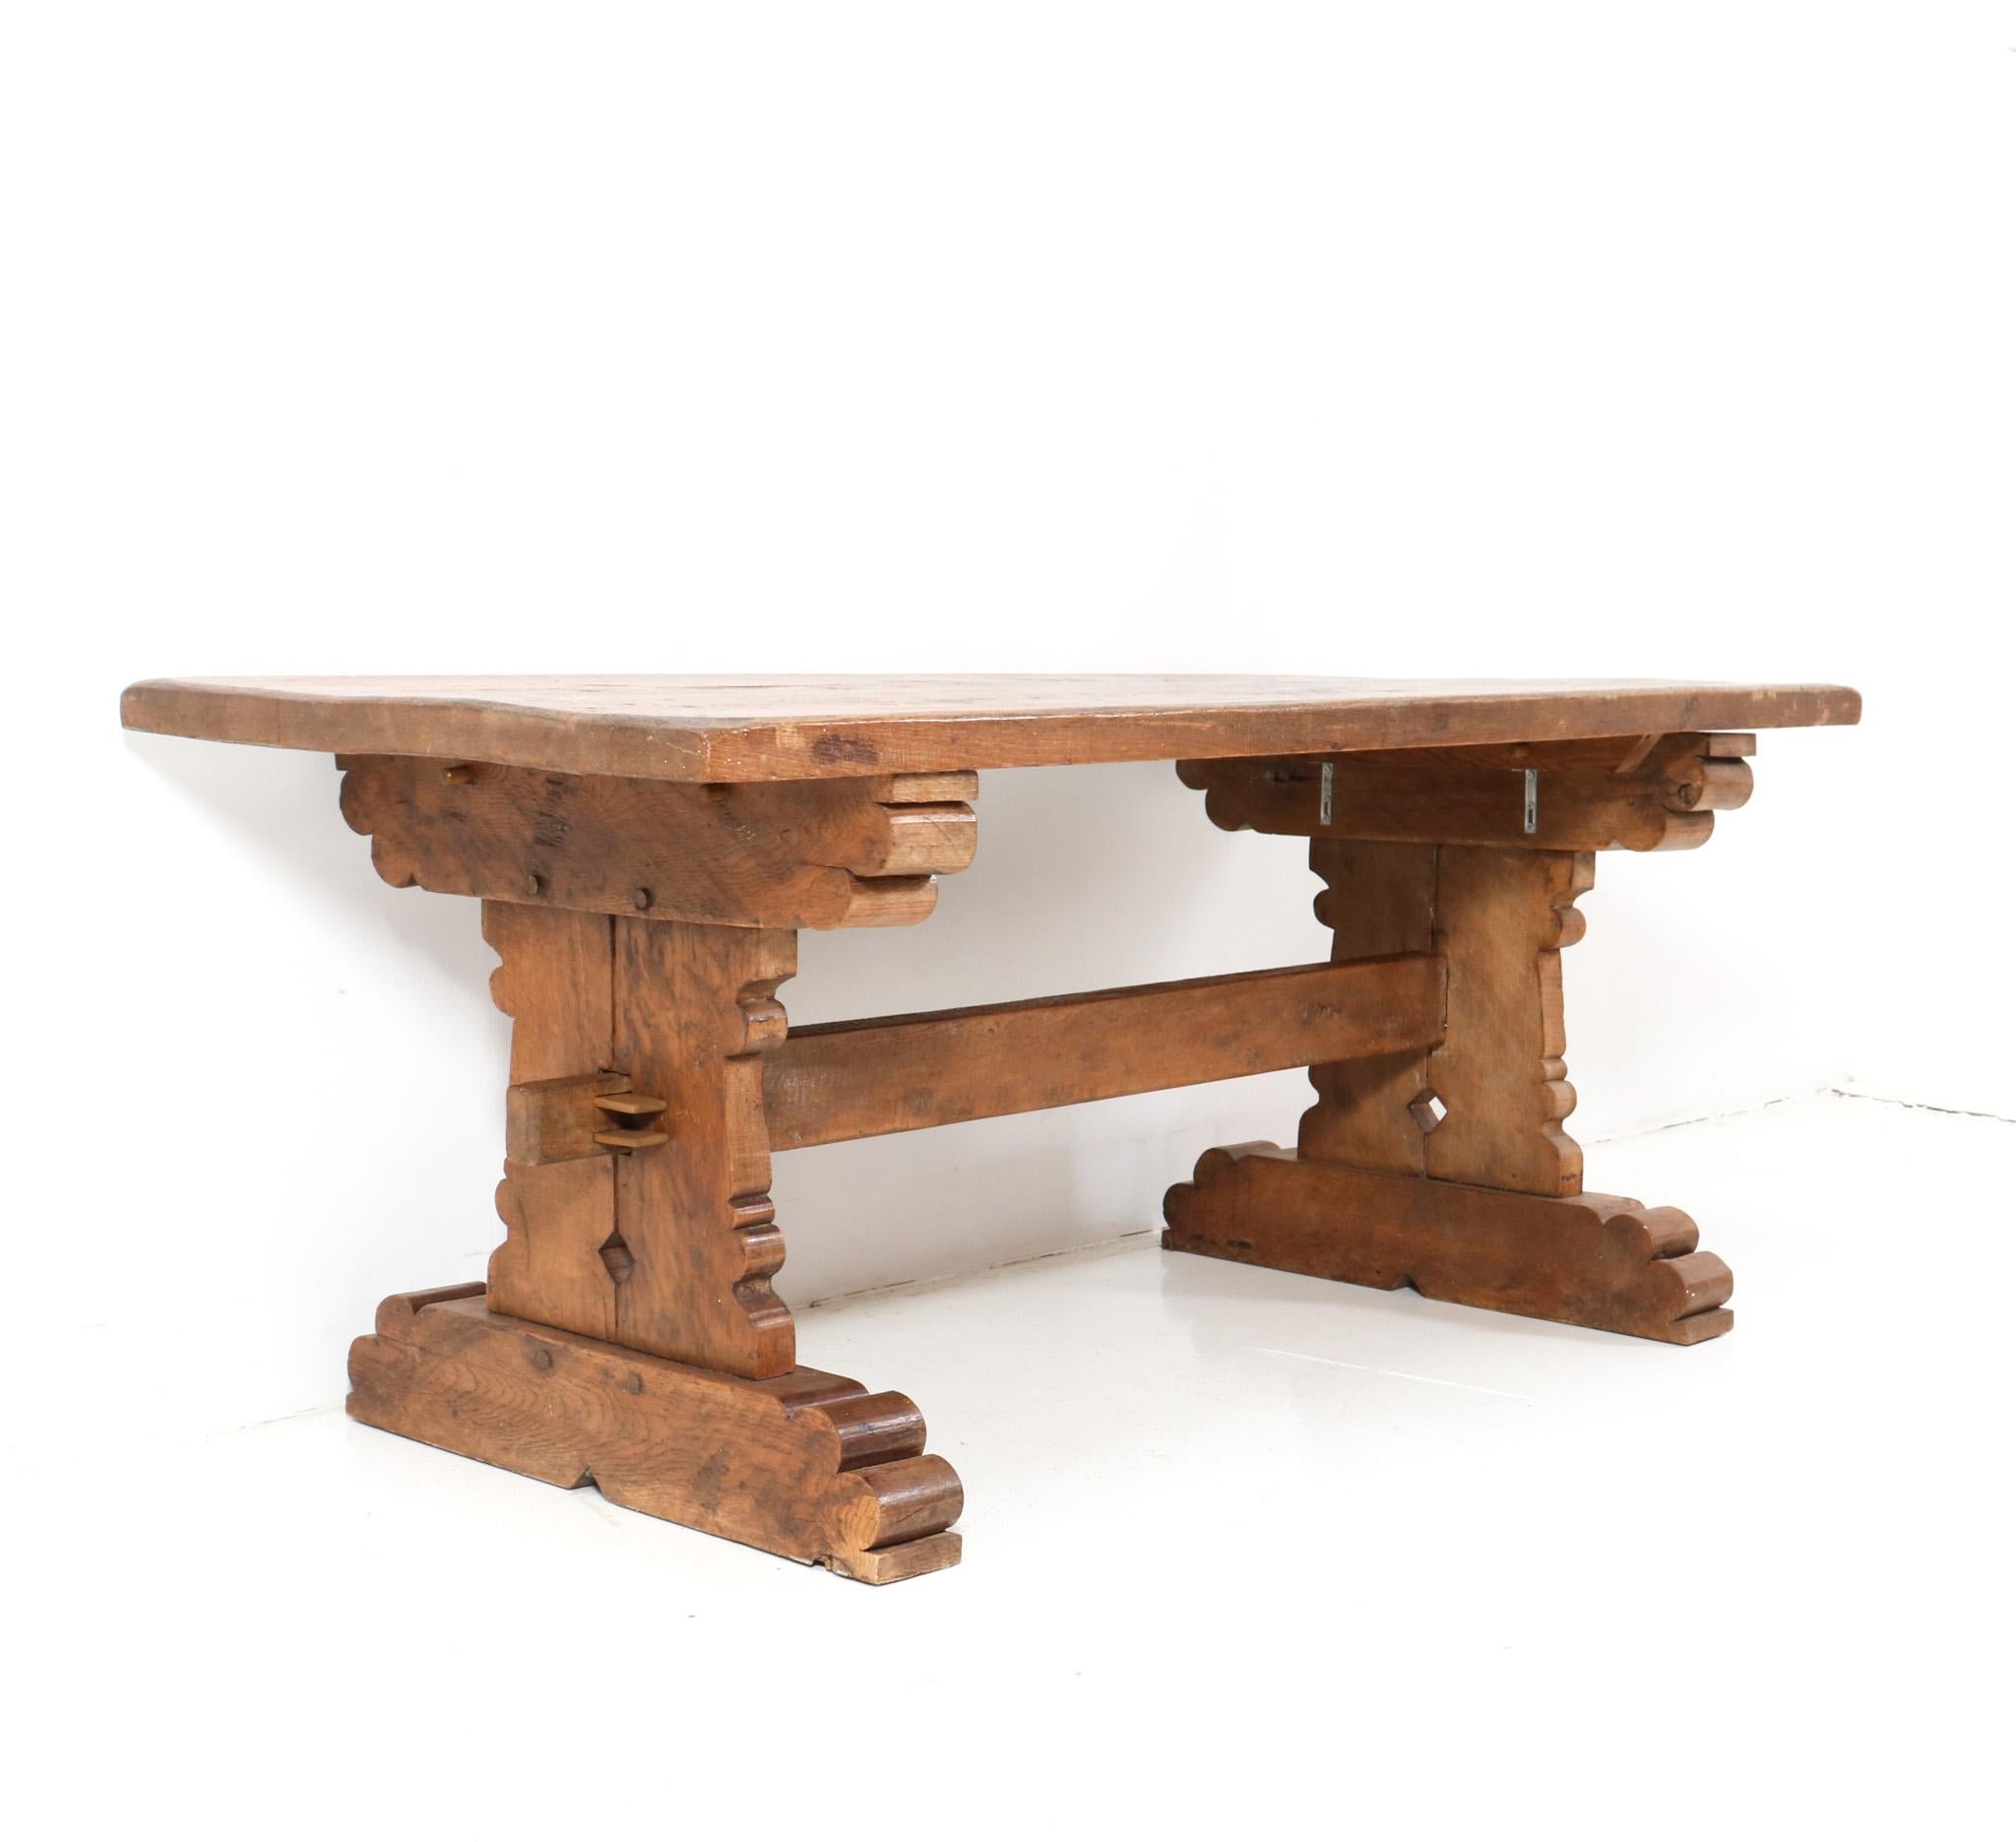 Stunning Brutalist dining room table or refectory table.
Striking Dutch design from the 1970s.
Solid oak base with original solid oak top.
This wonderful Brutalist dining room table or refectory table is in very good original condition with minor